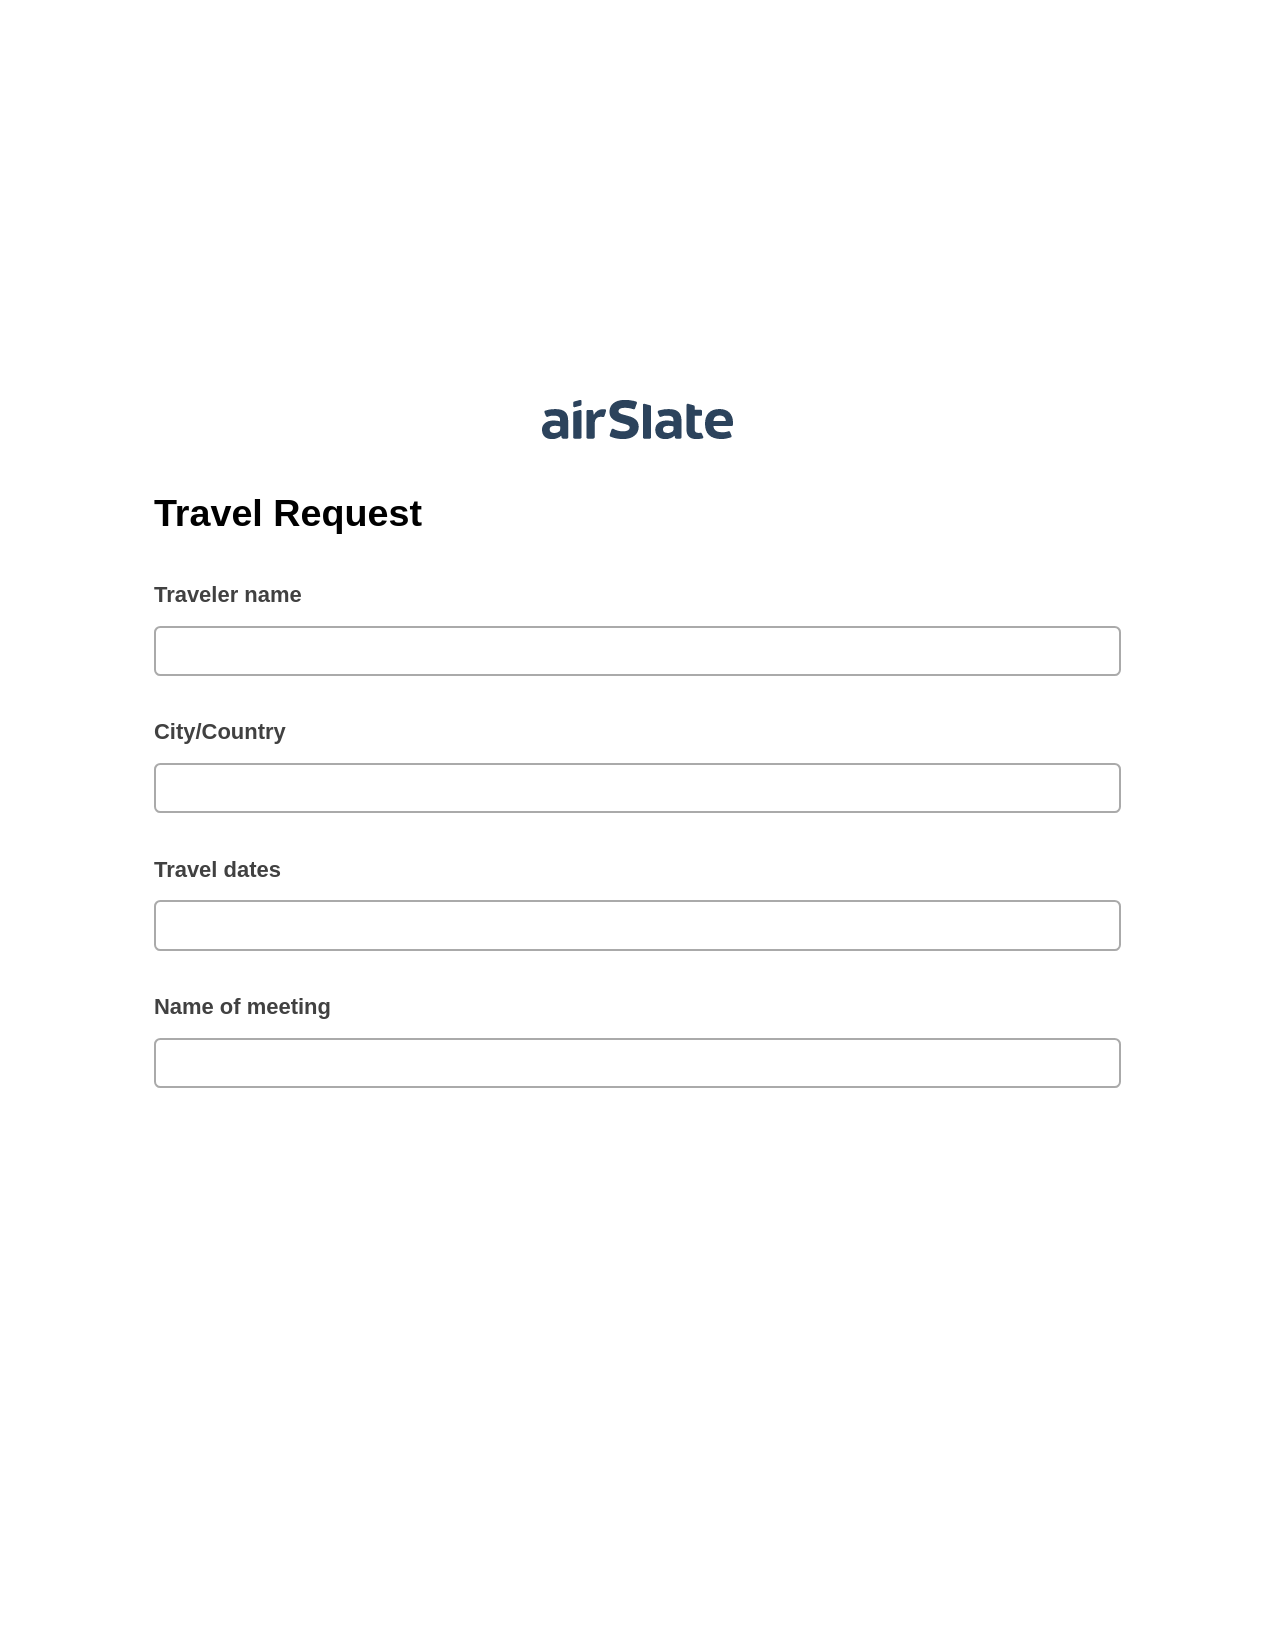 Travel Request Pre-fill Slate from MS Dynamics 365 Records Bot, Create slate addon, Email Notification Postfinish Bot